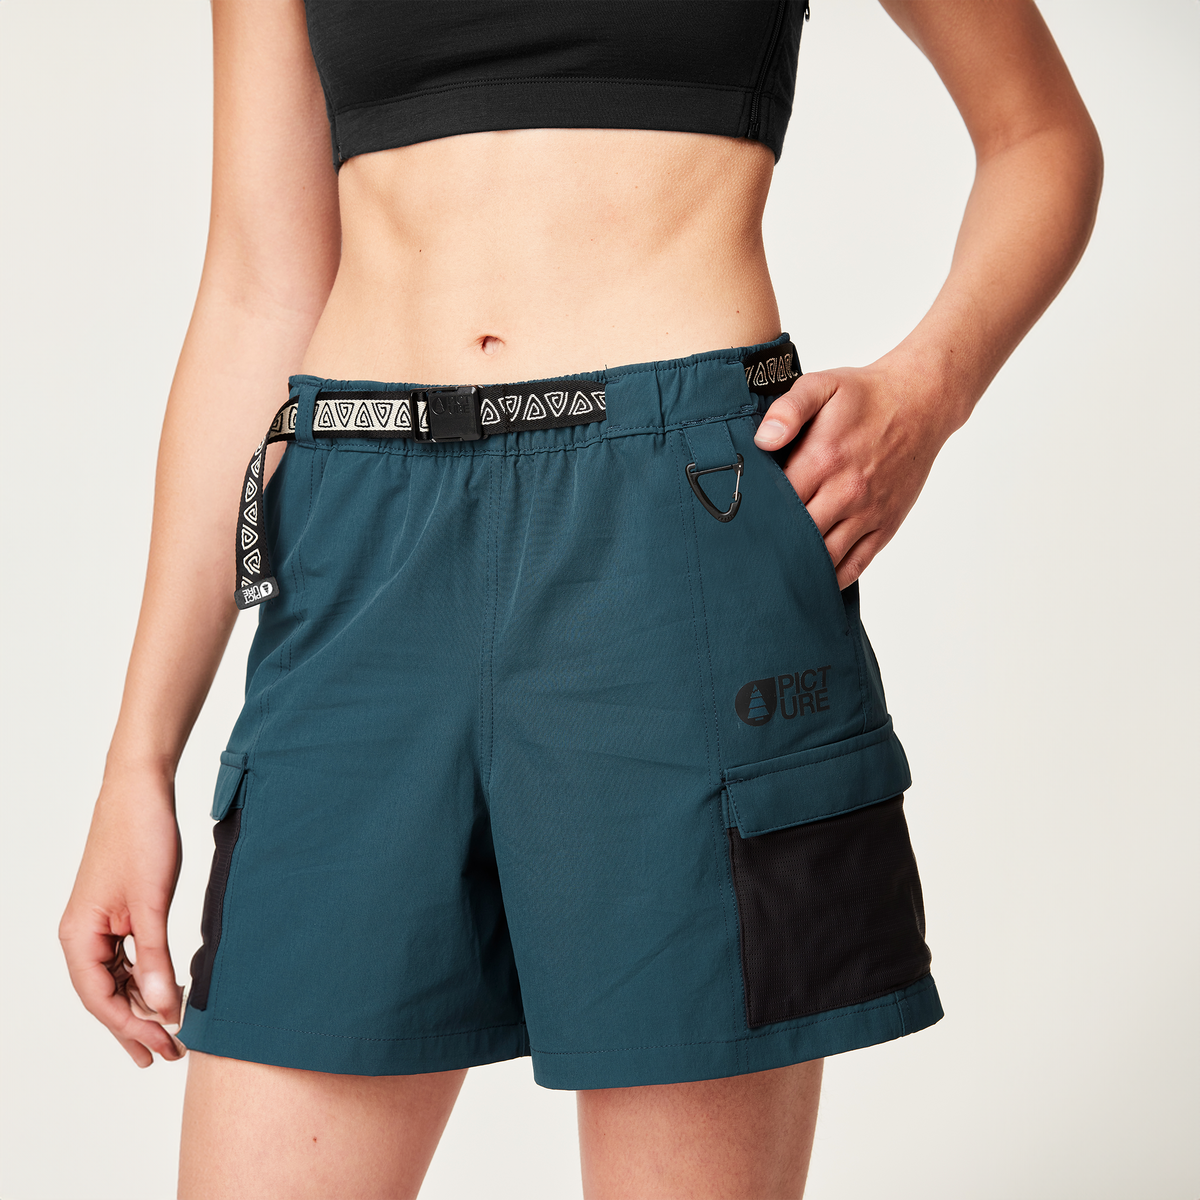 Picture Women's Camba Stretch Shorts